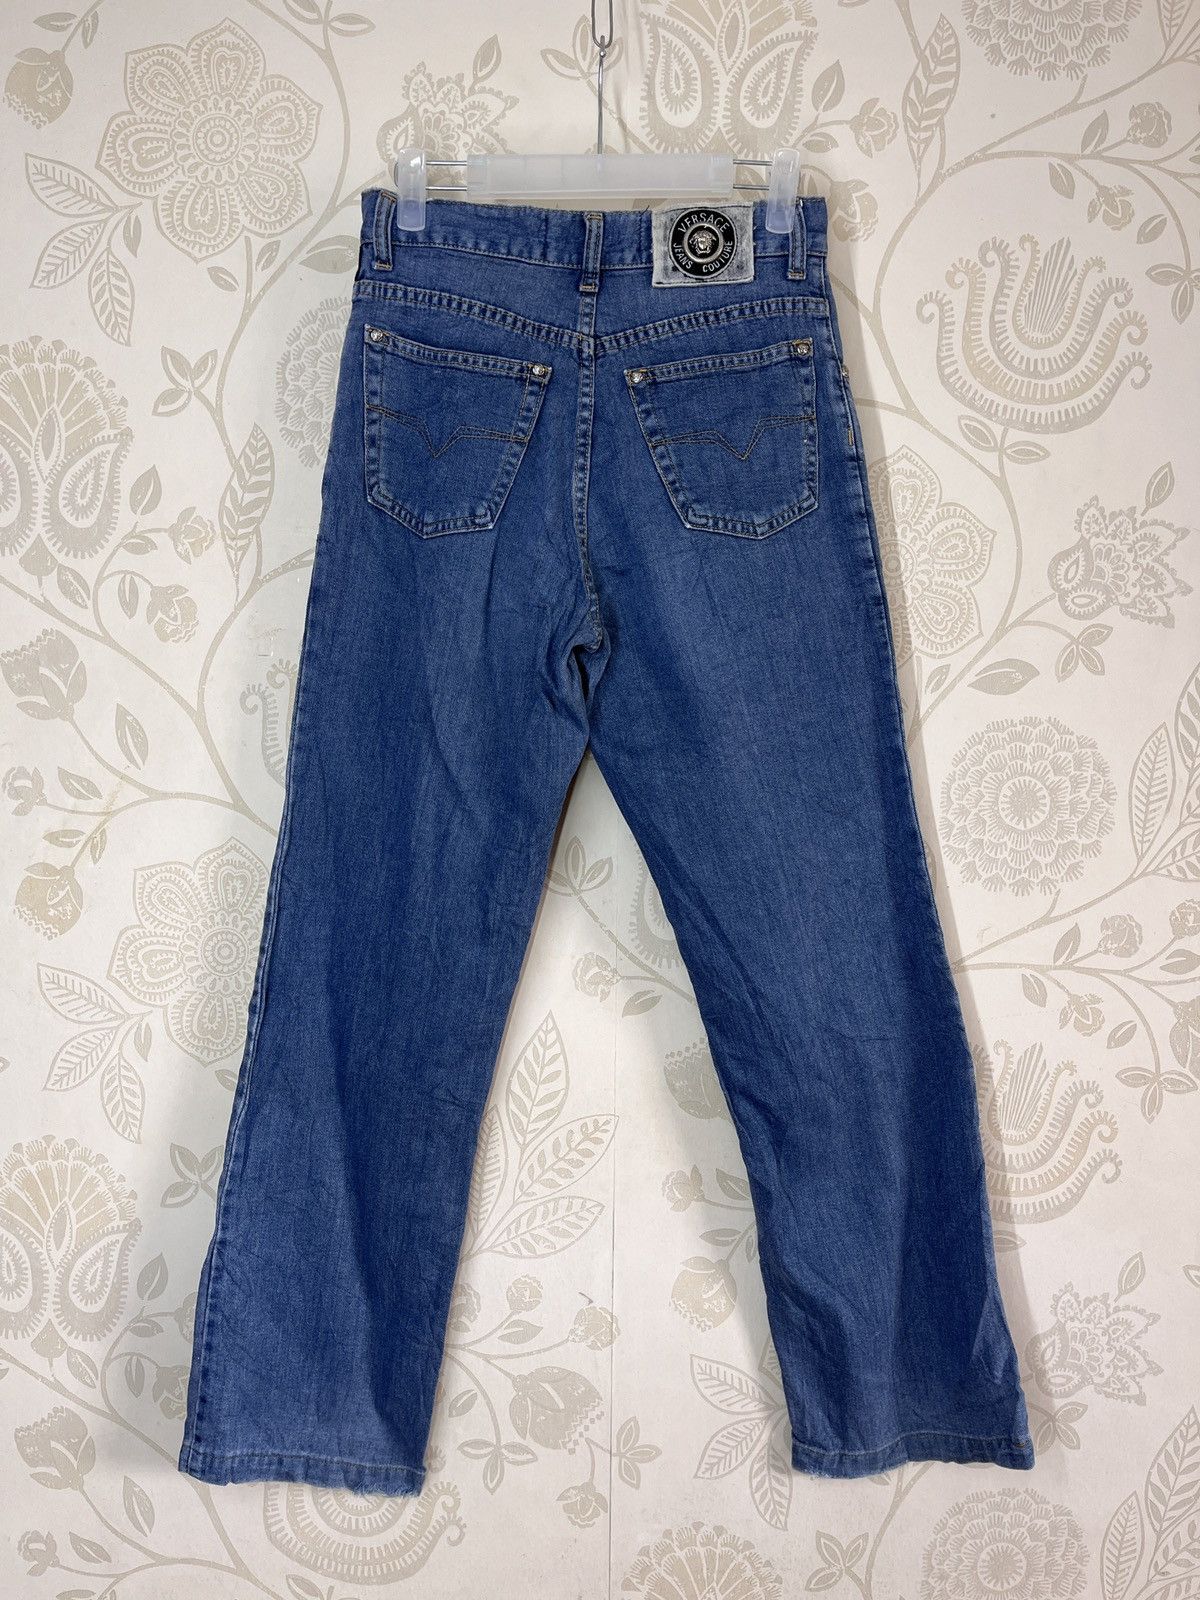 Vintage Versace Denim Jeans Made In Italy - 2